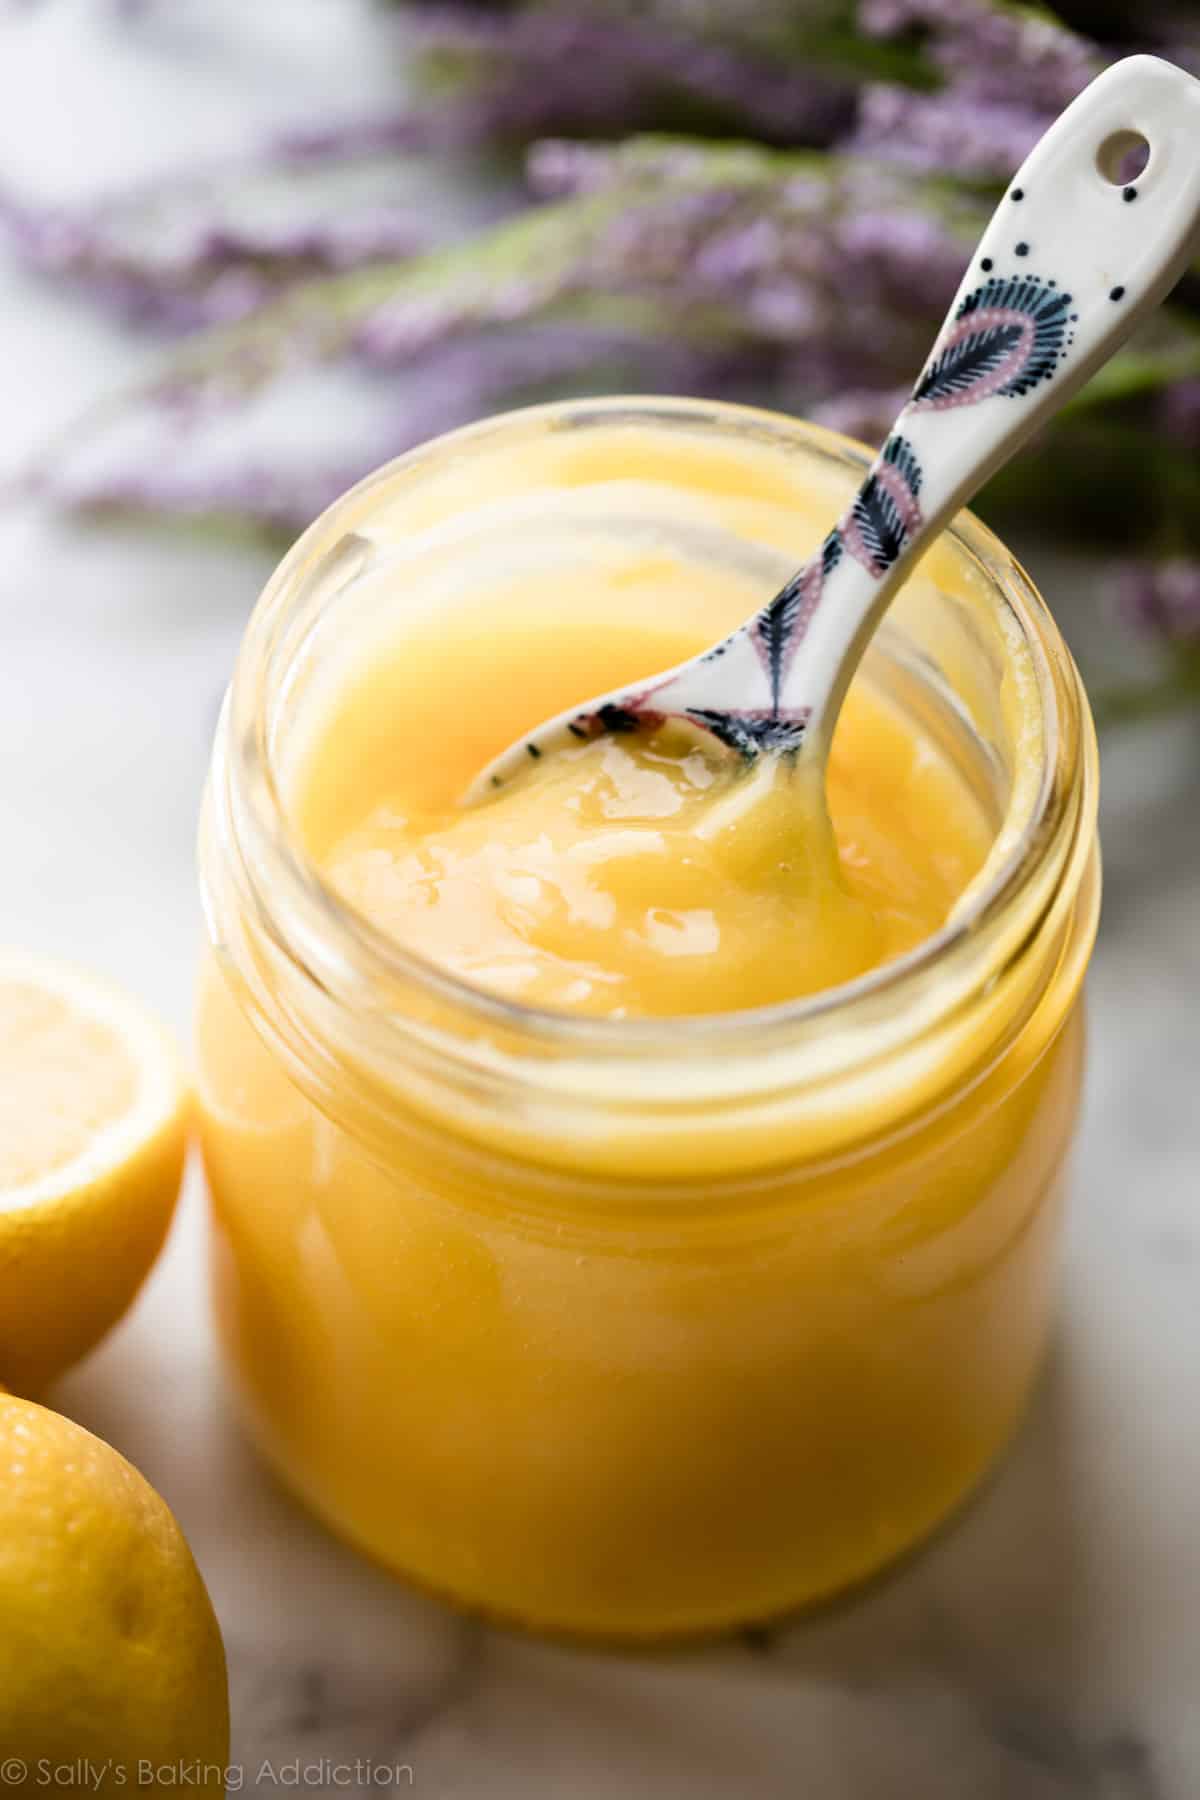 How to Make Lemon Curd (5 Ingredients) - Sally's Baking Addiction